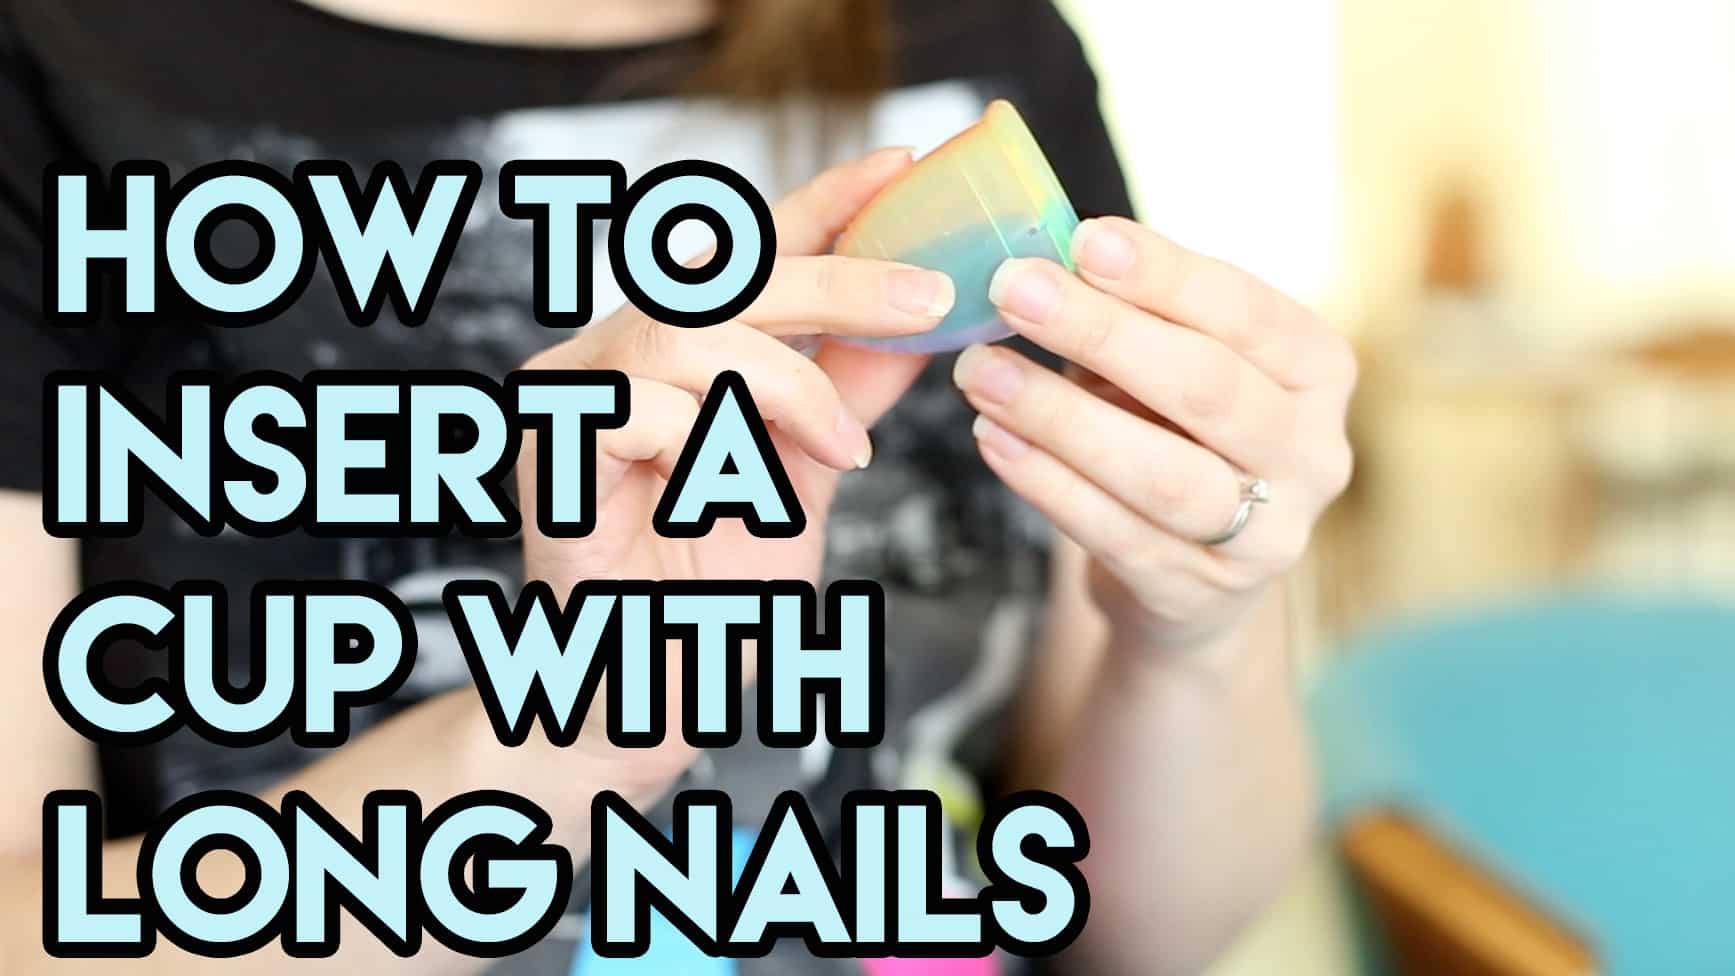 Inserting Your Menstrual Cup With Long Nails - Put A Cup In It